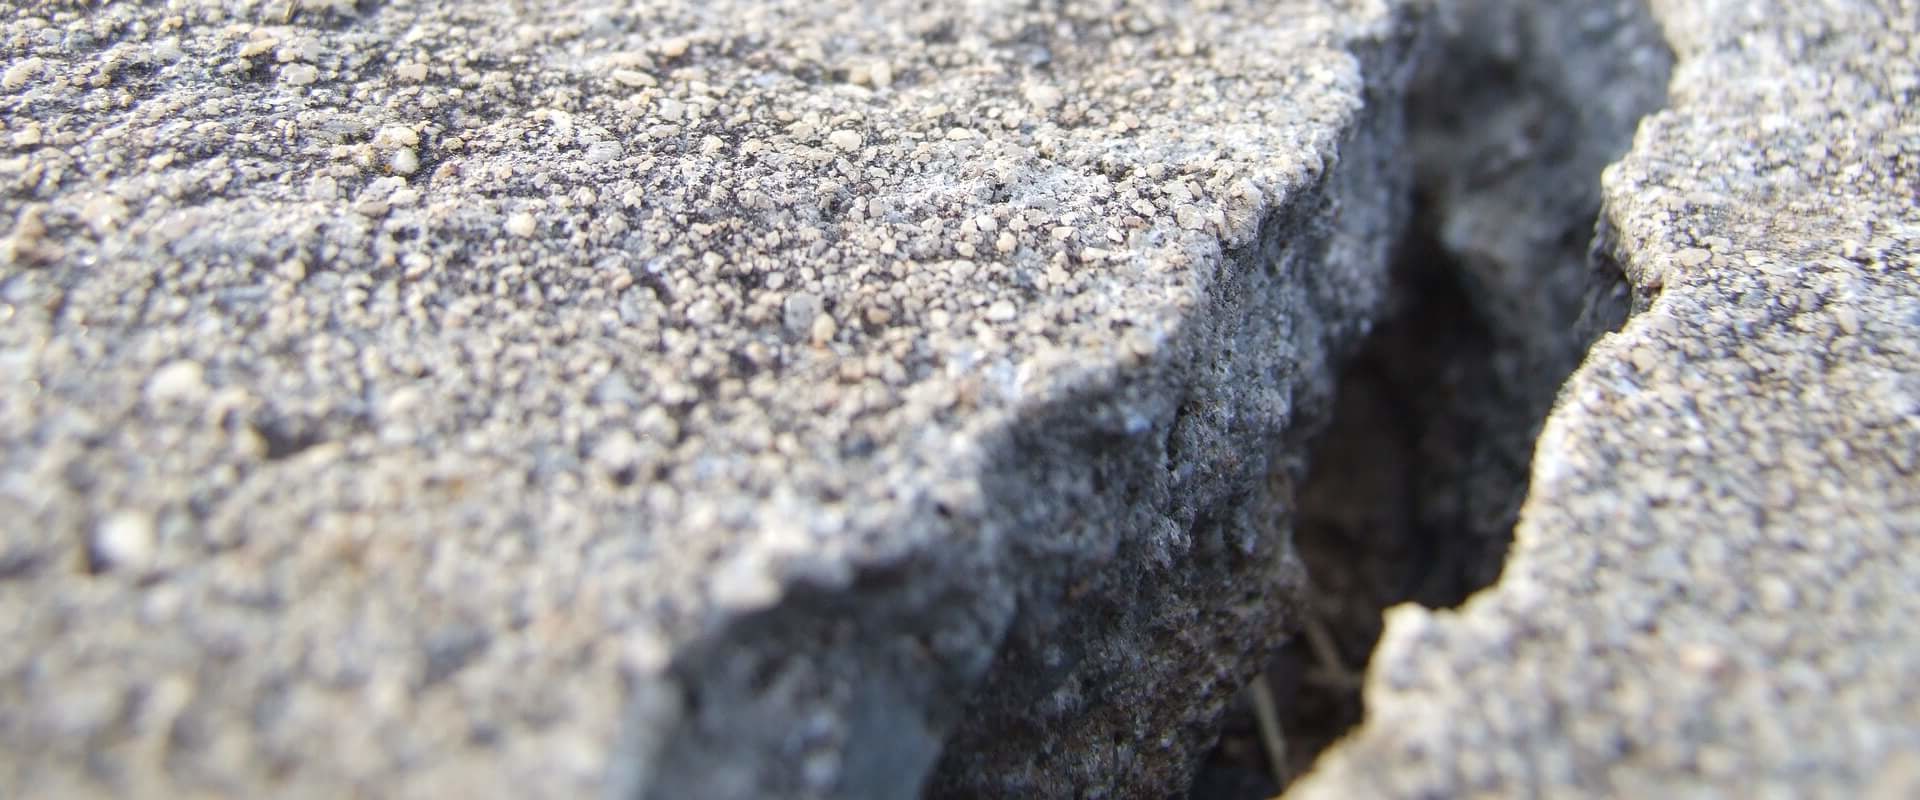 Repairing Cracks in Concrete: A Step-by-Step Guide